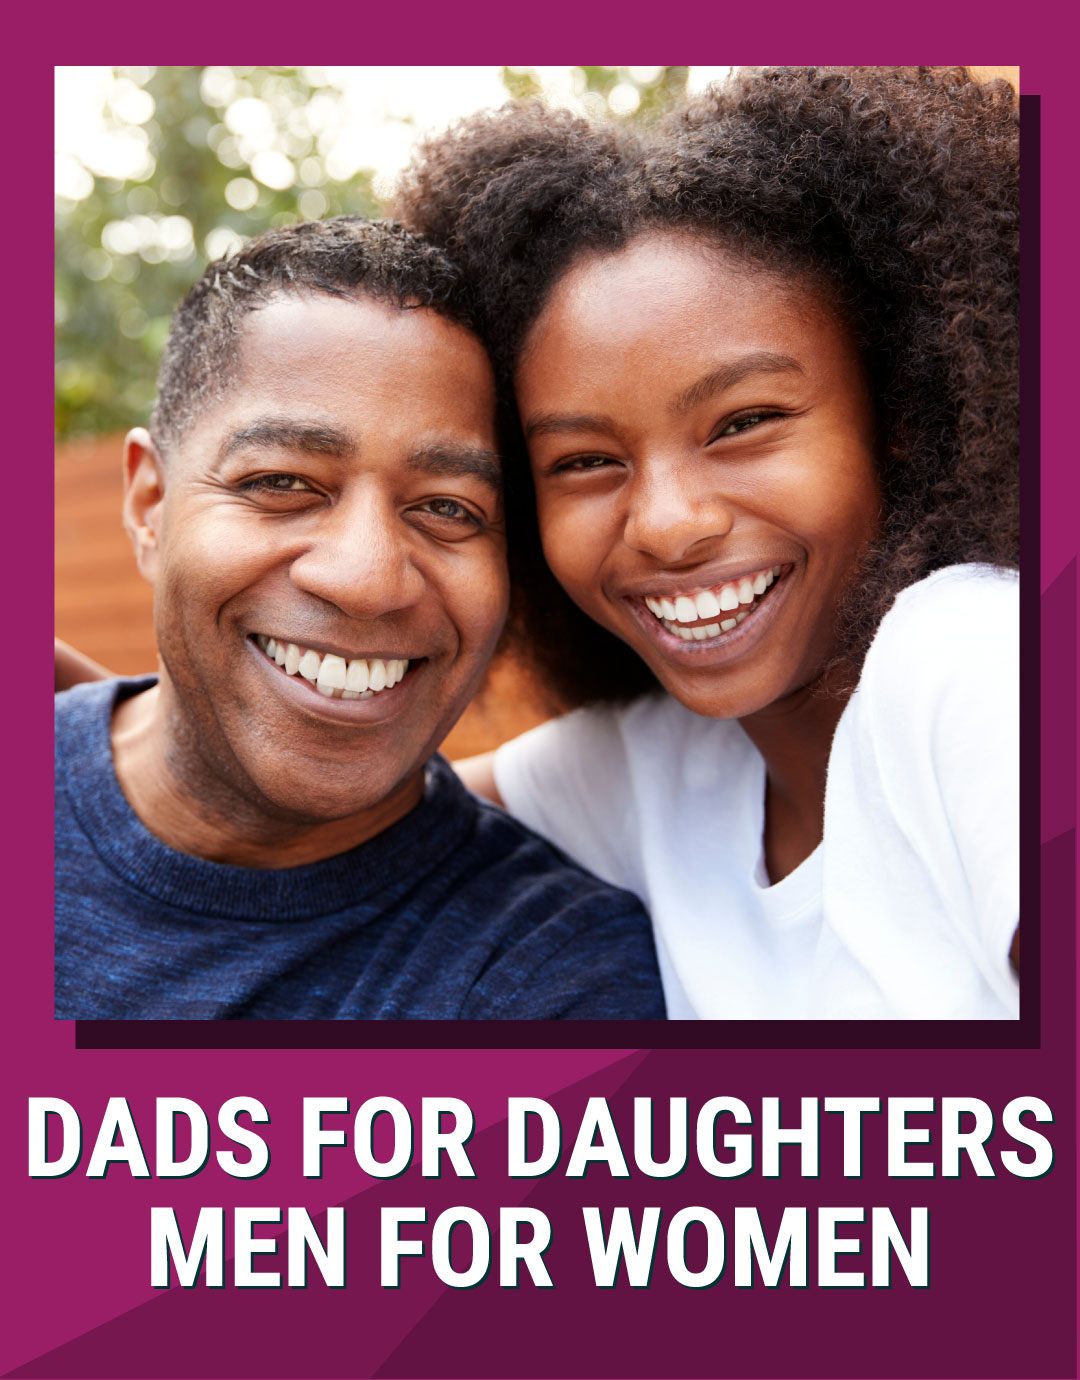 Dads for Daughters/Men for Women